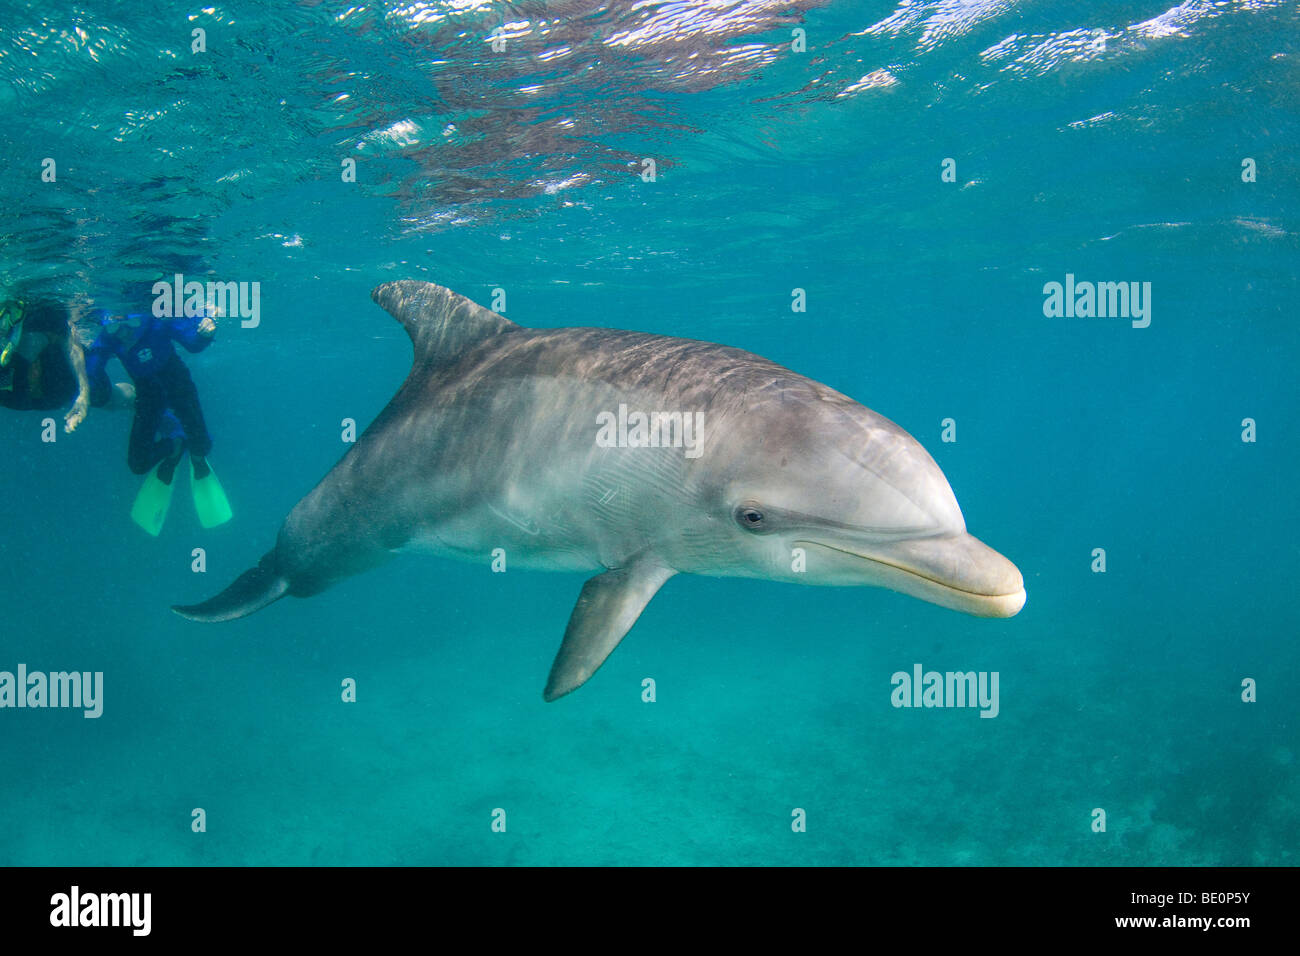 Snorkelers (MR) and an Atlantic Bottlenose Dolphin, Tursiops truncatus, Curacao, Netherlands Antilles, Caribbean. Stock Photo